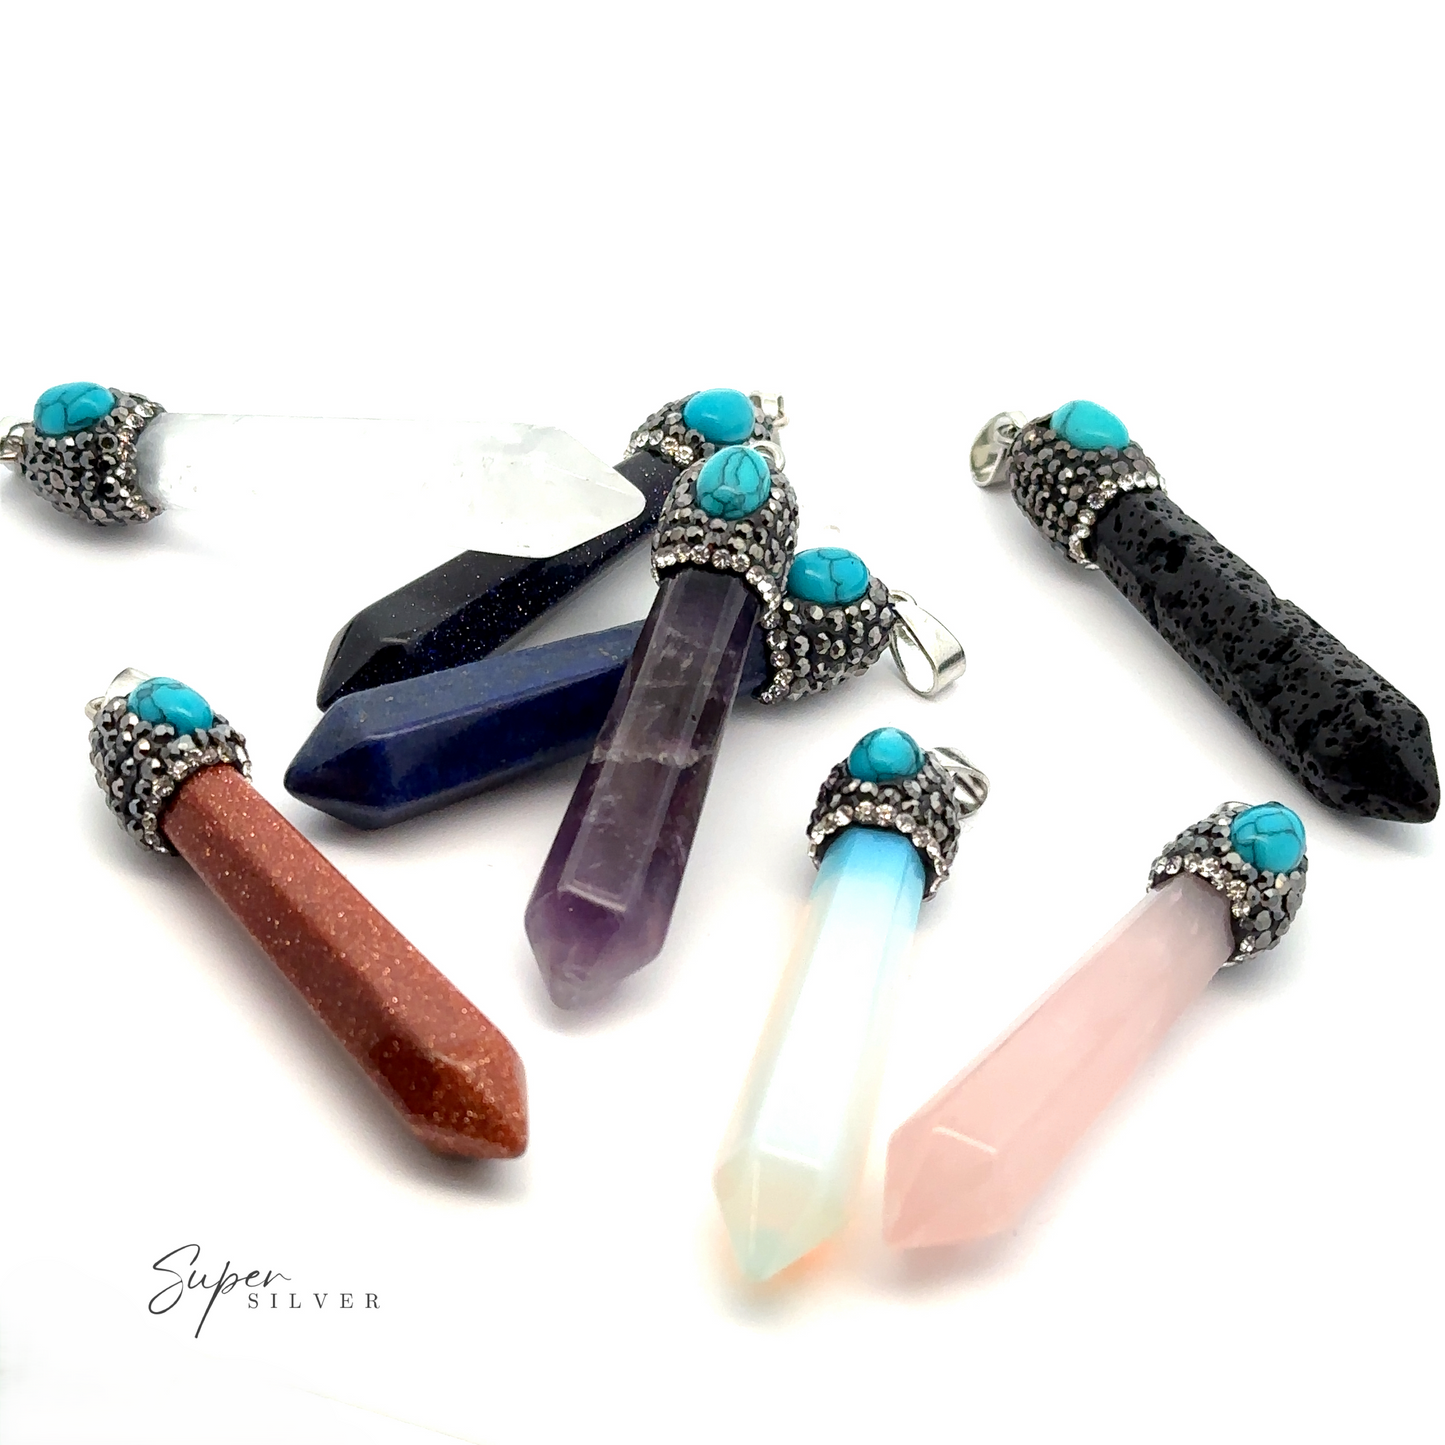 The image displays various gemstone pendants with silver caps and turquoise accents, featuring stones like rose quartz, amethyst, black tourmaline, and others. Among them, a Stone Obelisk Pendant with striking clarity stands out, all beautifully arranged on a white background.